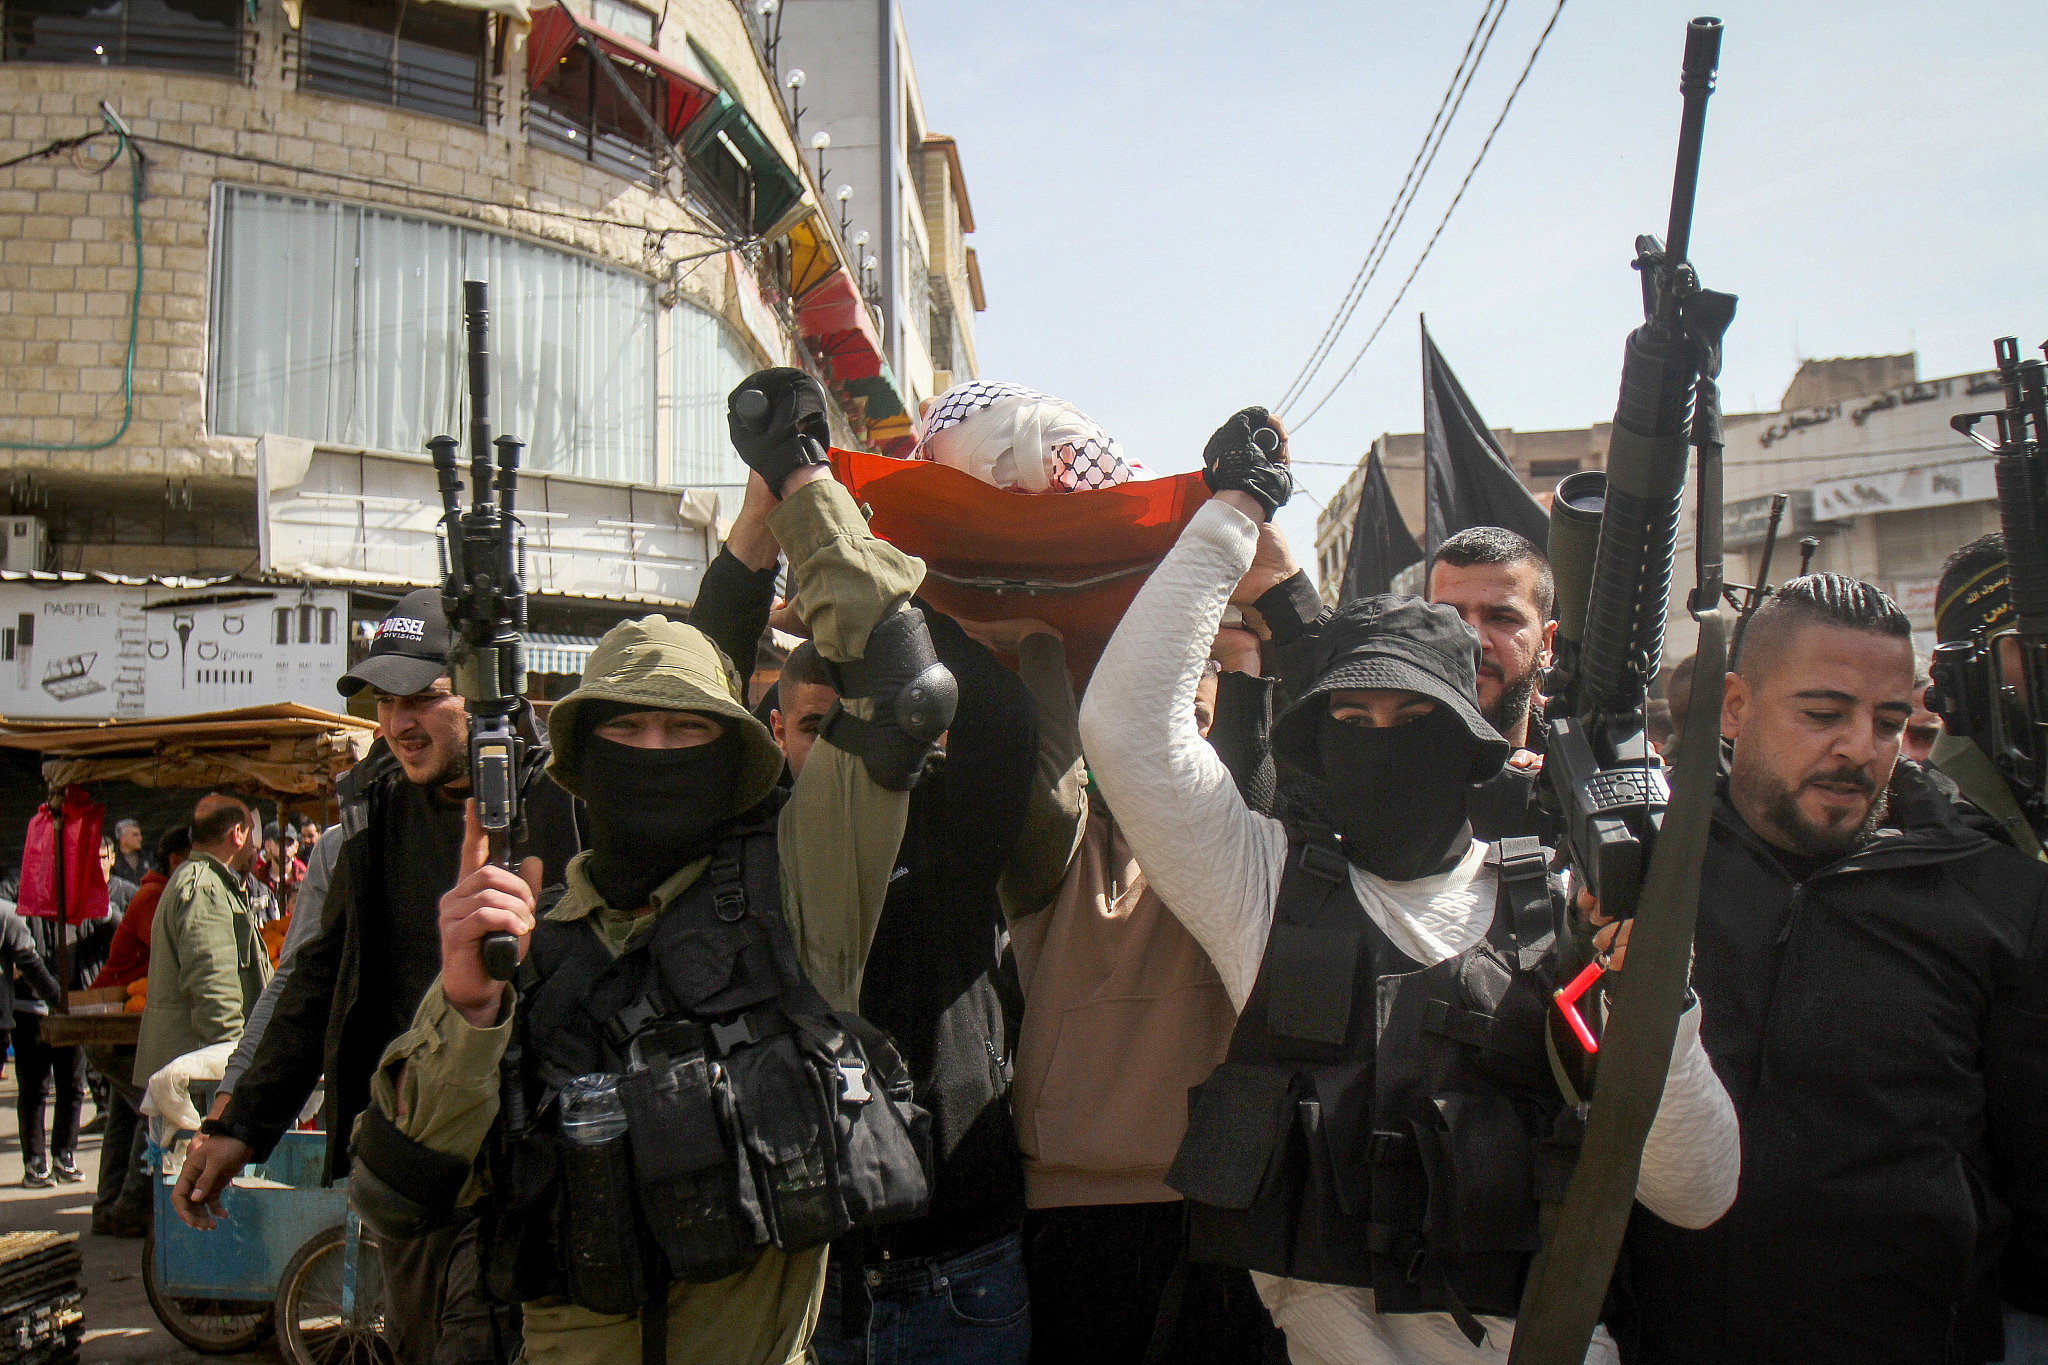 Armed Palestinian militants of Islamic Jihad take part in the funeral of two men shot dead by Israeli security forces during their funeral in Jenin, in the West Bank, March 1, 2022. (Nasser Ishtayeh/Flash90)